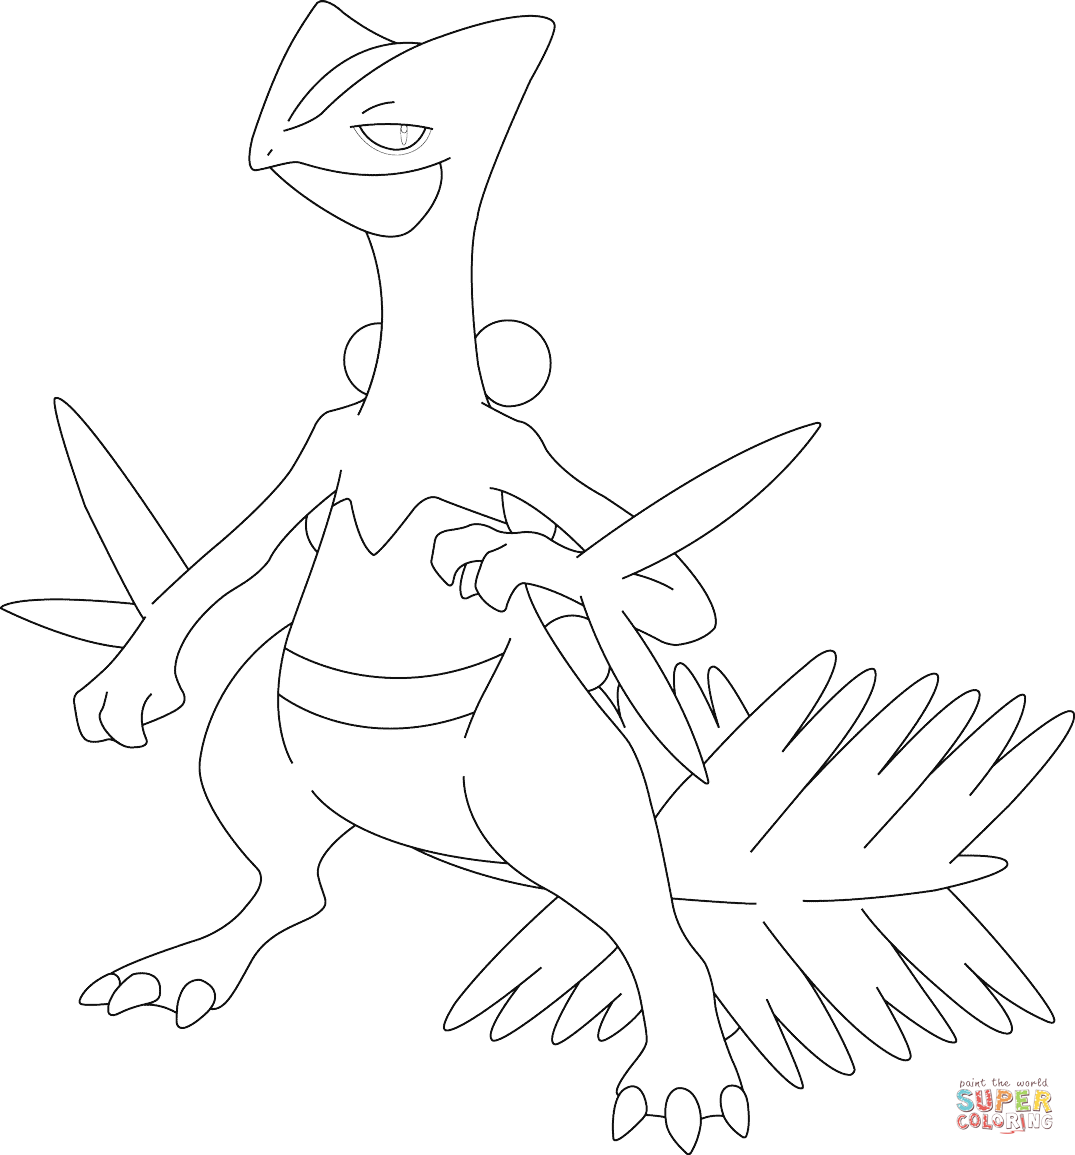 Sceptile Pokemon coloring page Free Printable Coloring Pages